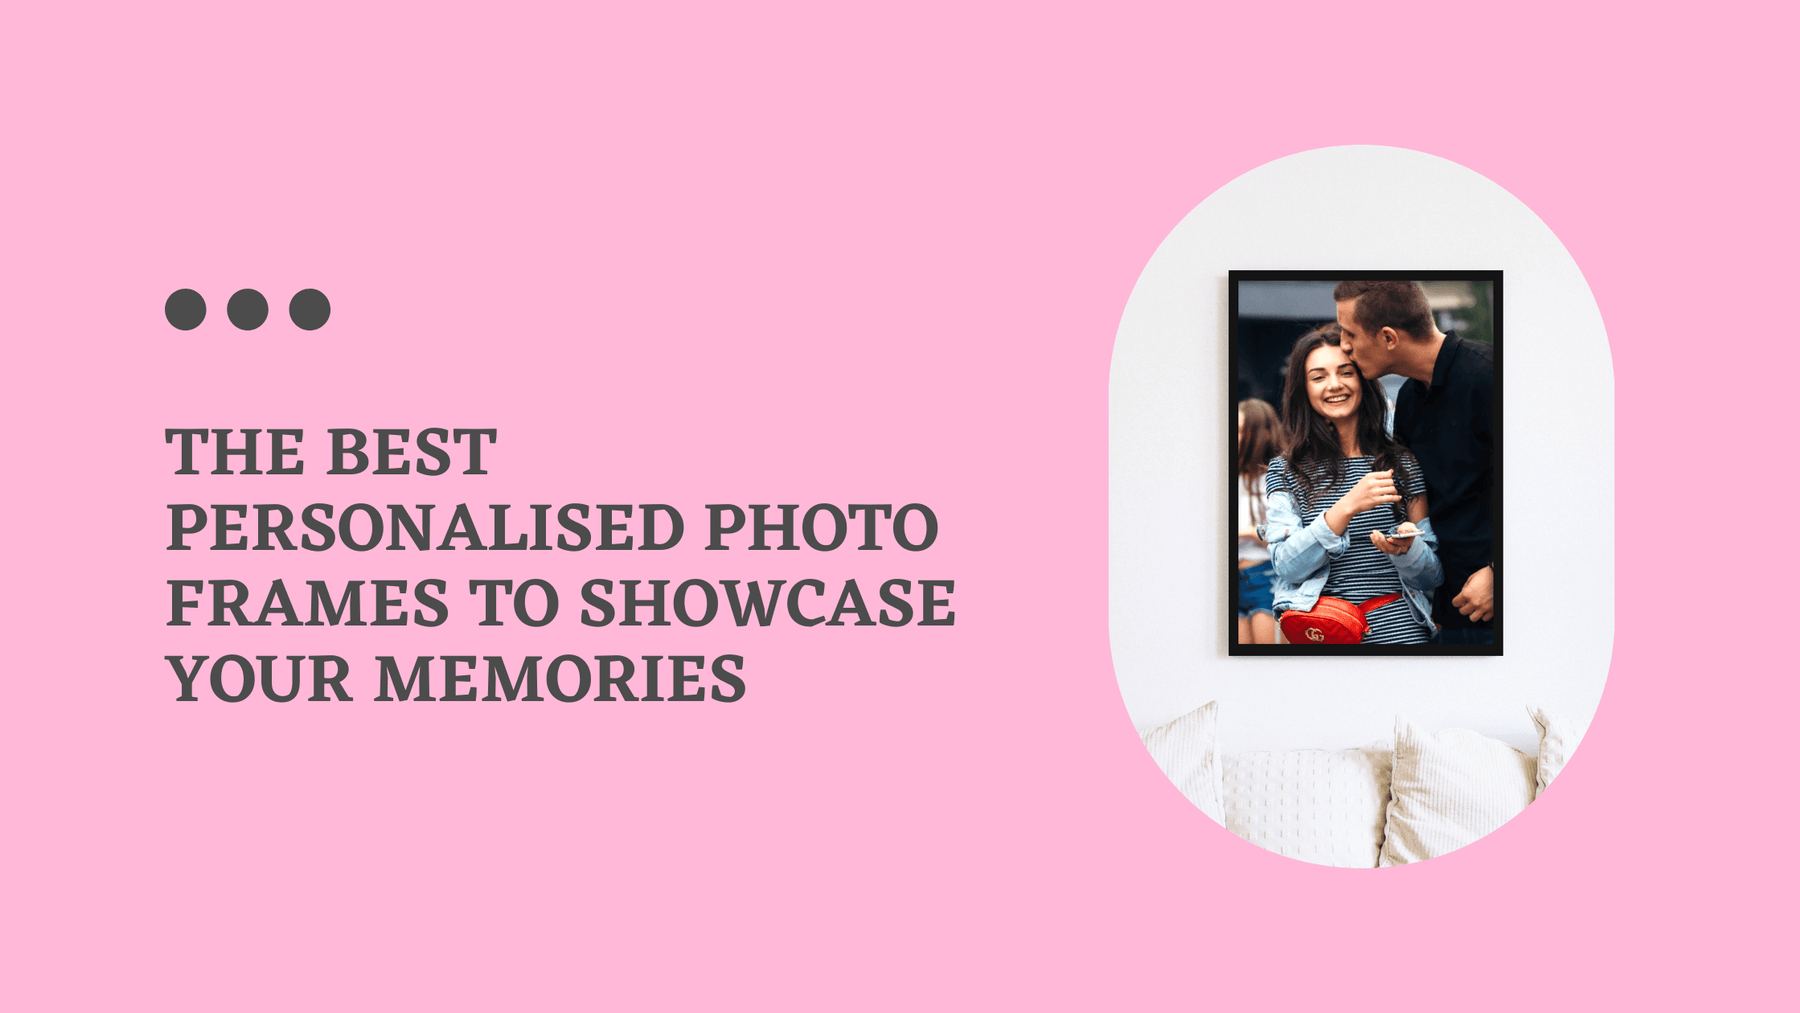 The Best Personalised Photo Frames to Showcase Your Memories